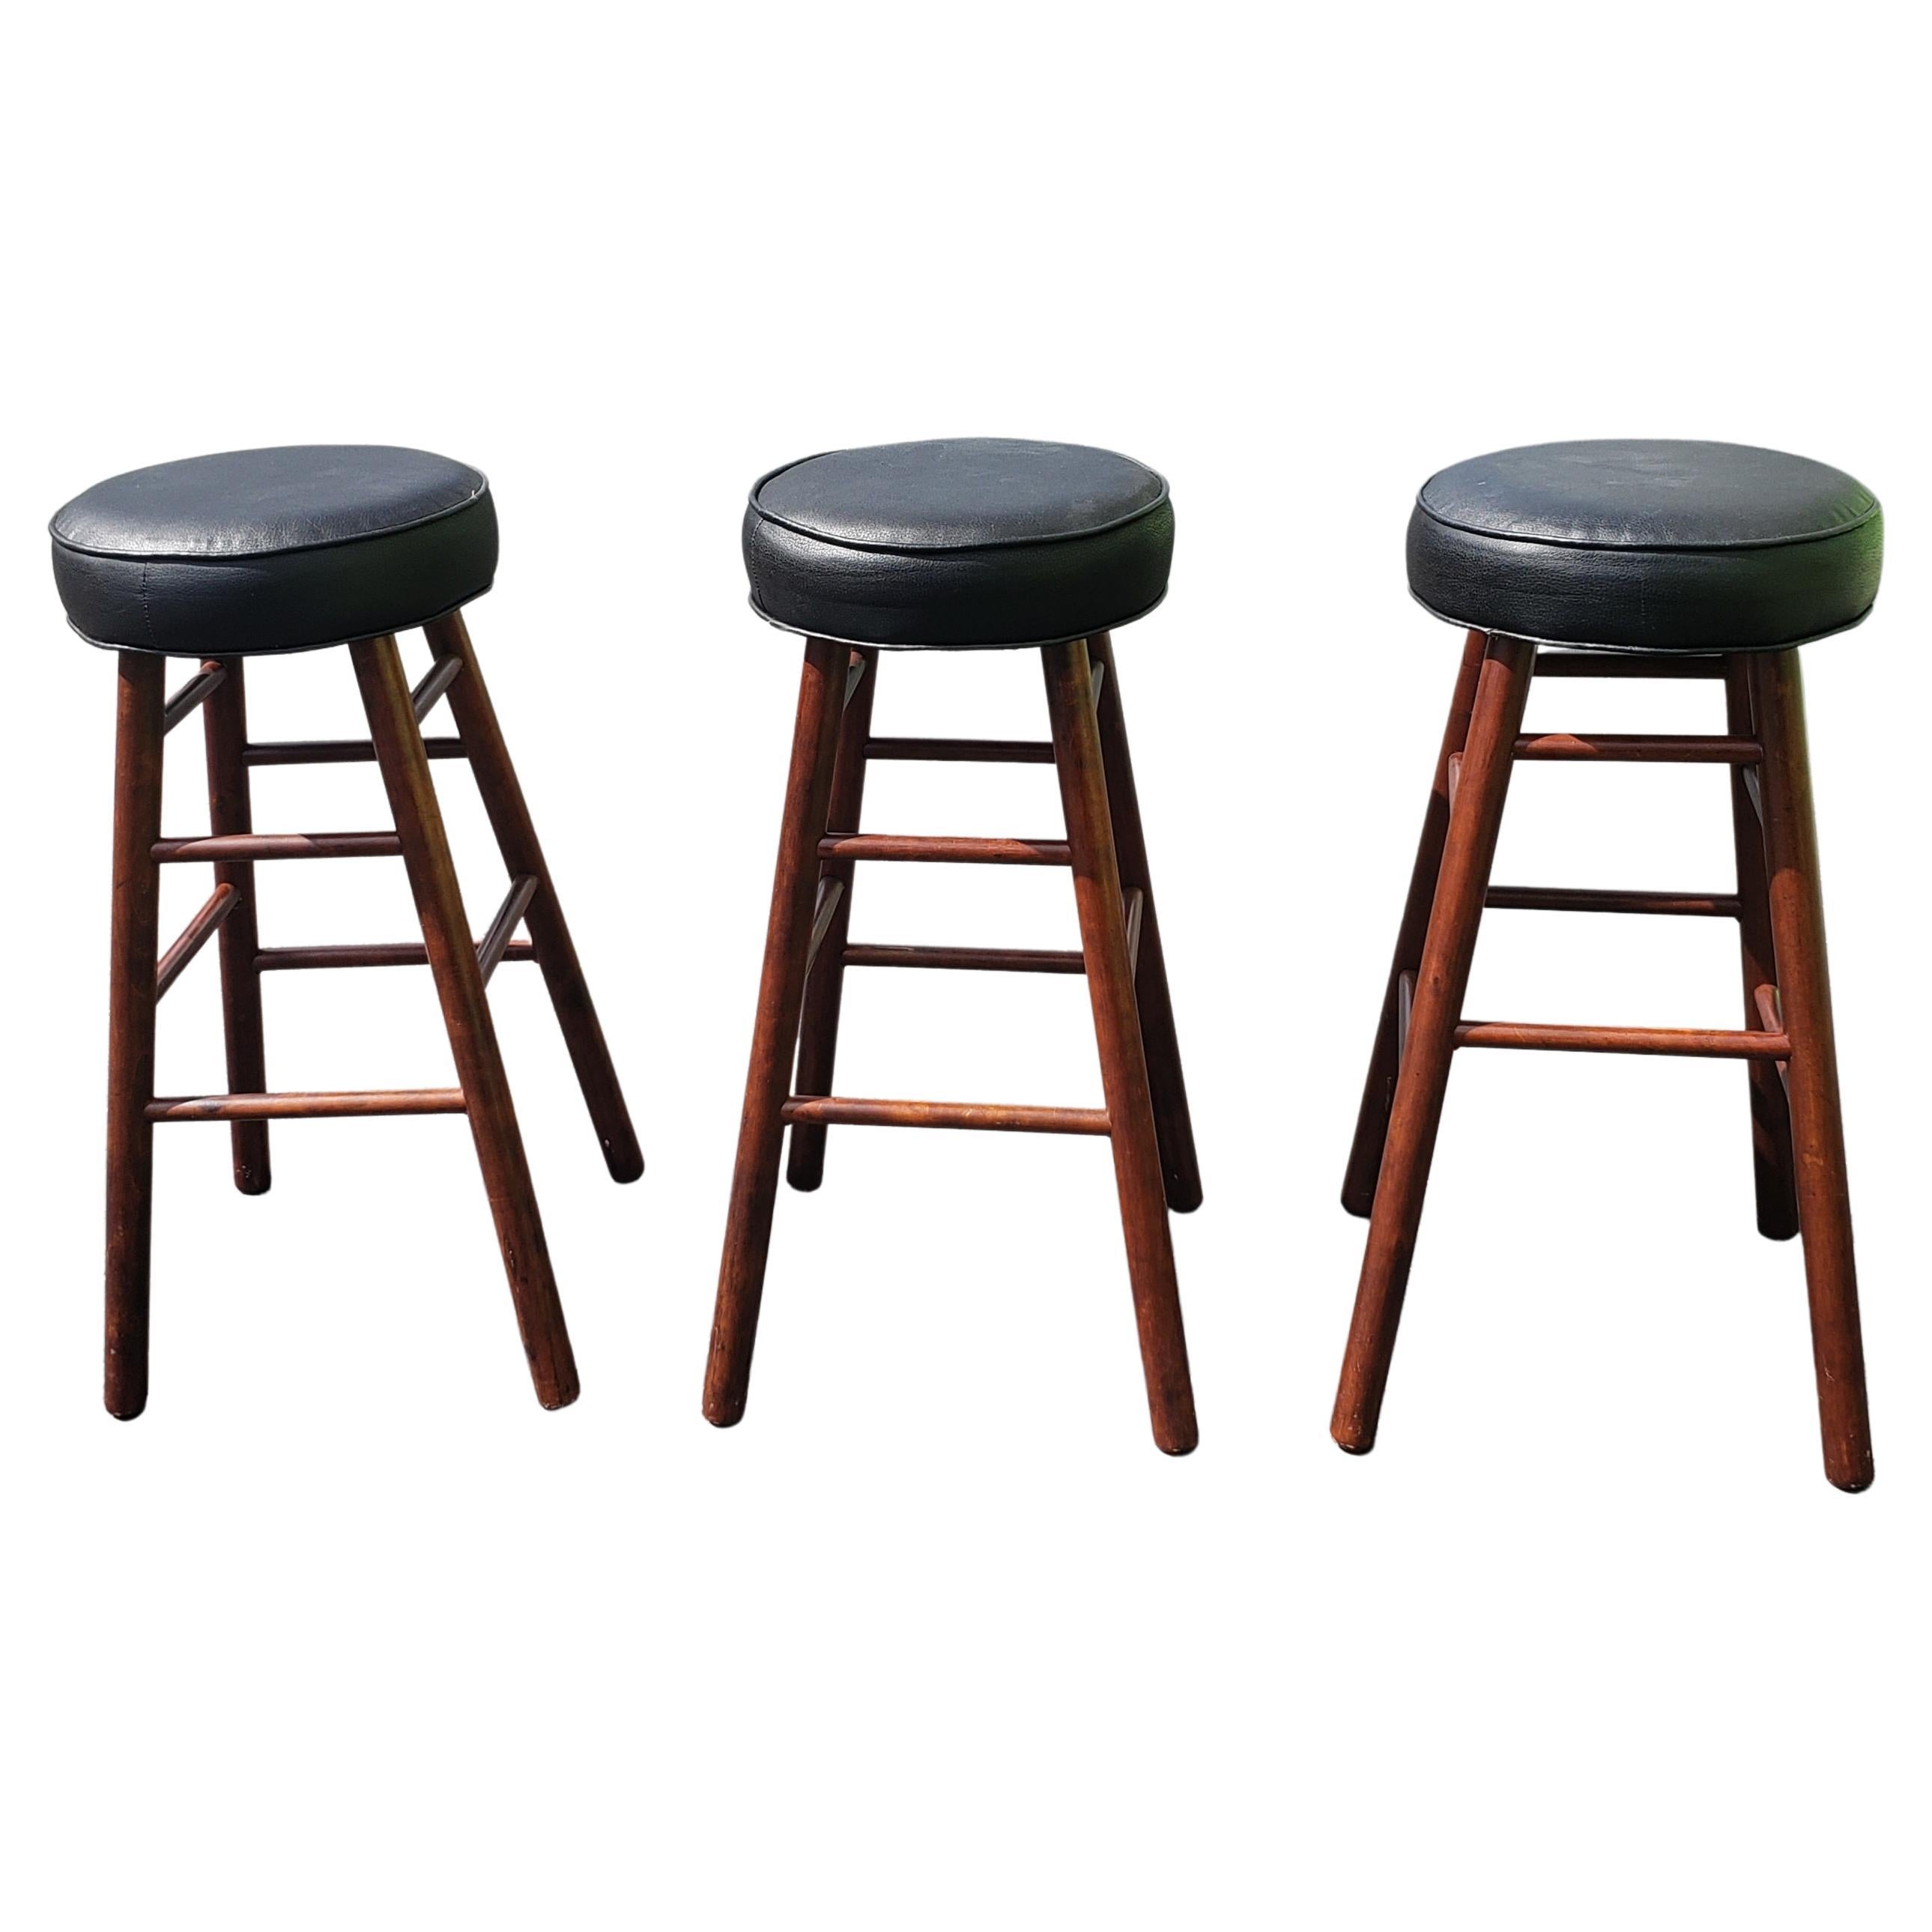 Set of 3 Mid-Century Maple and Leather Seat Bar Stools